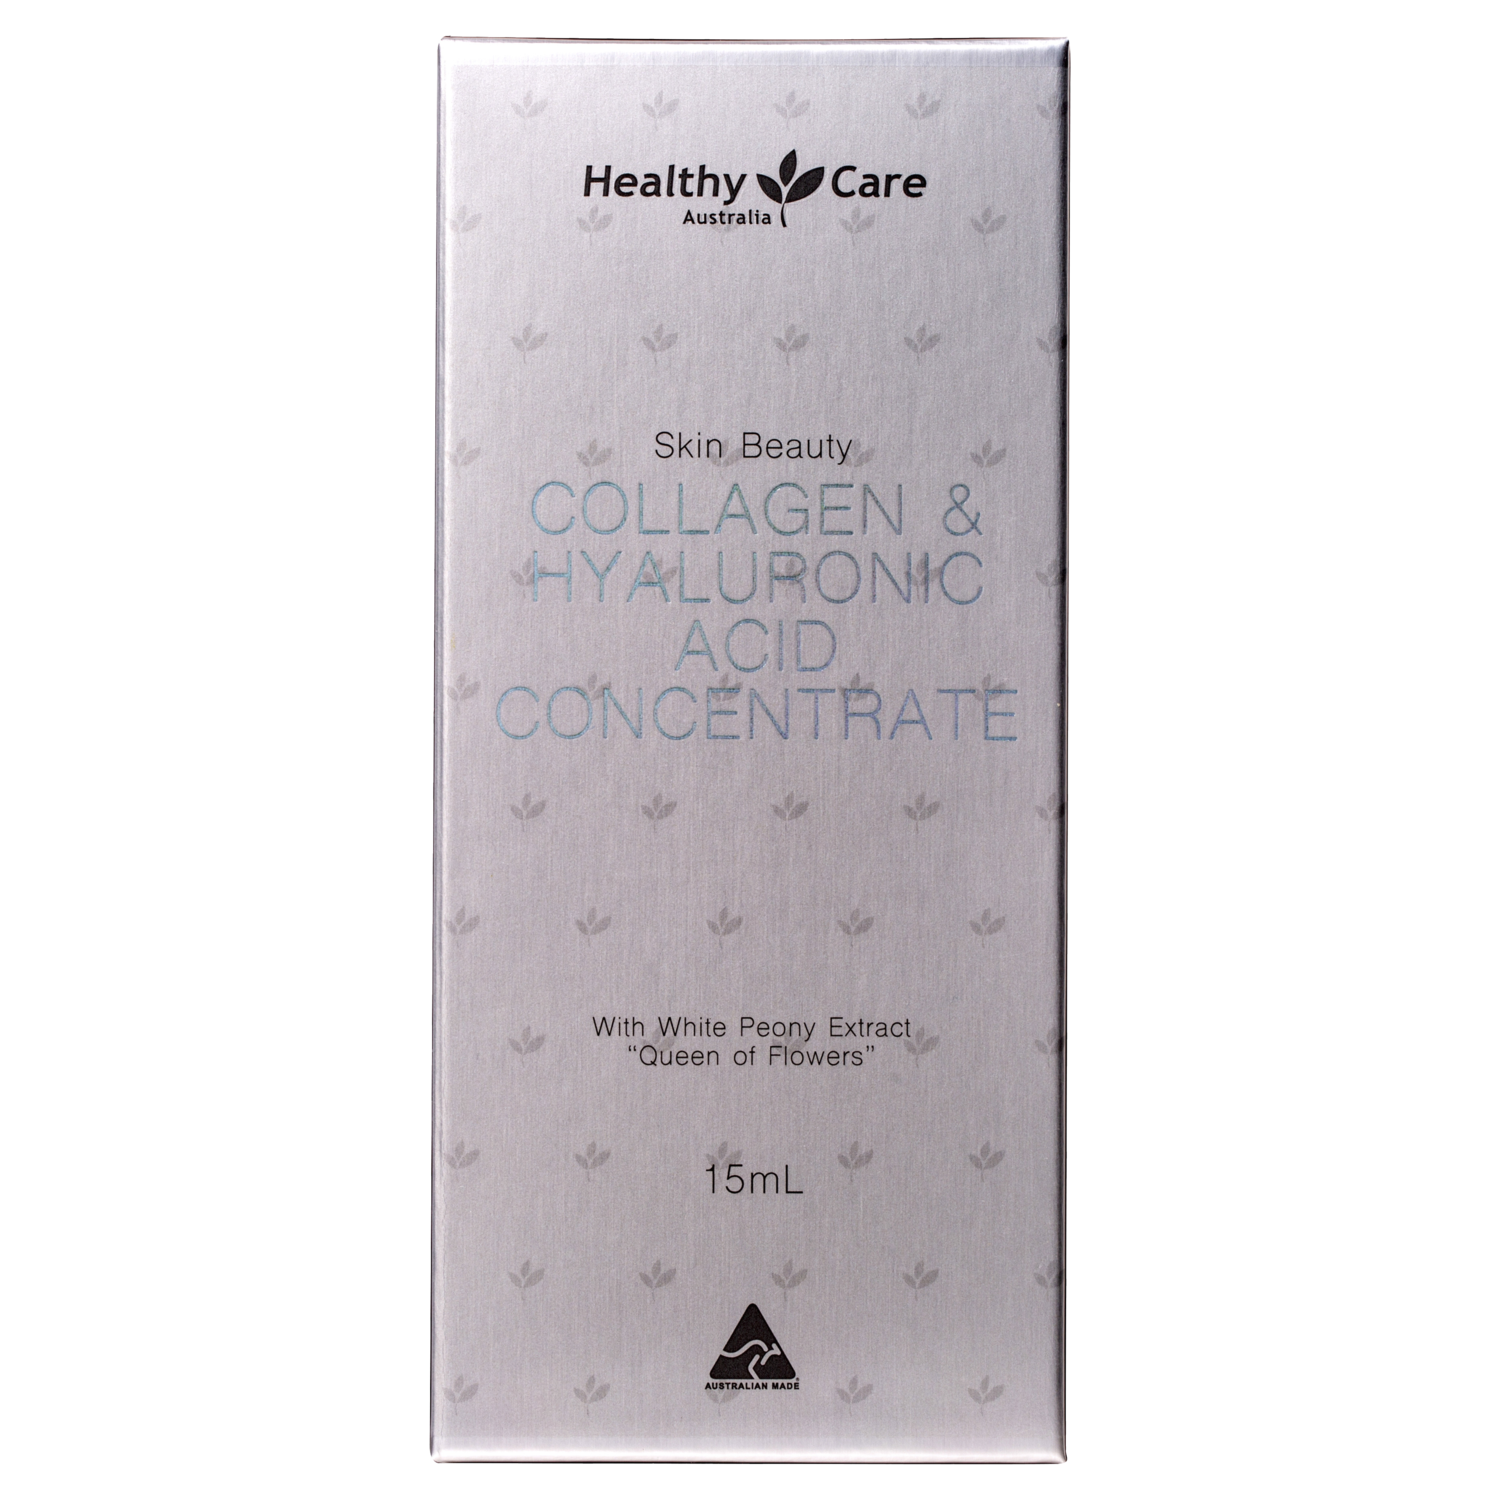 Collagen + Hyaluronic Acid Concentrate 15mL-Facial Cleansers-Healthy Care Australia